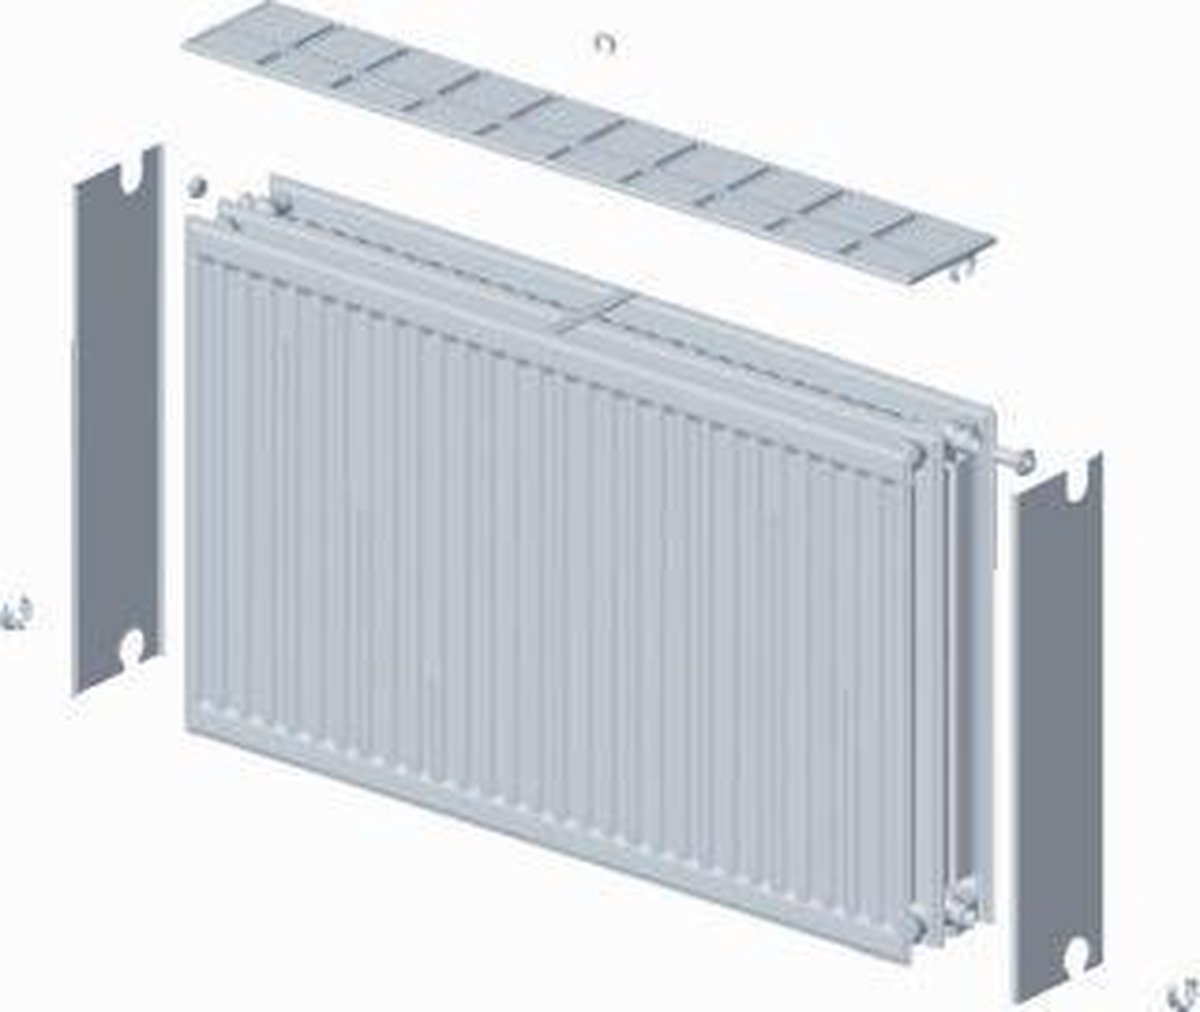 Stelrad paneelradiator Novello, staal, wit, (hxlxd) 600x1000x158mm, 33